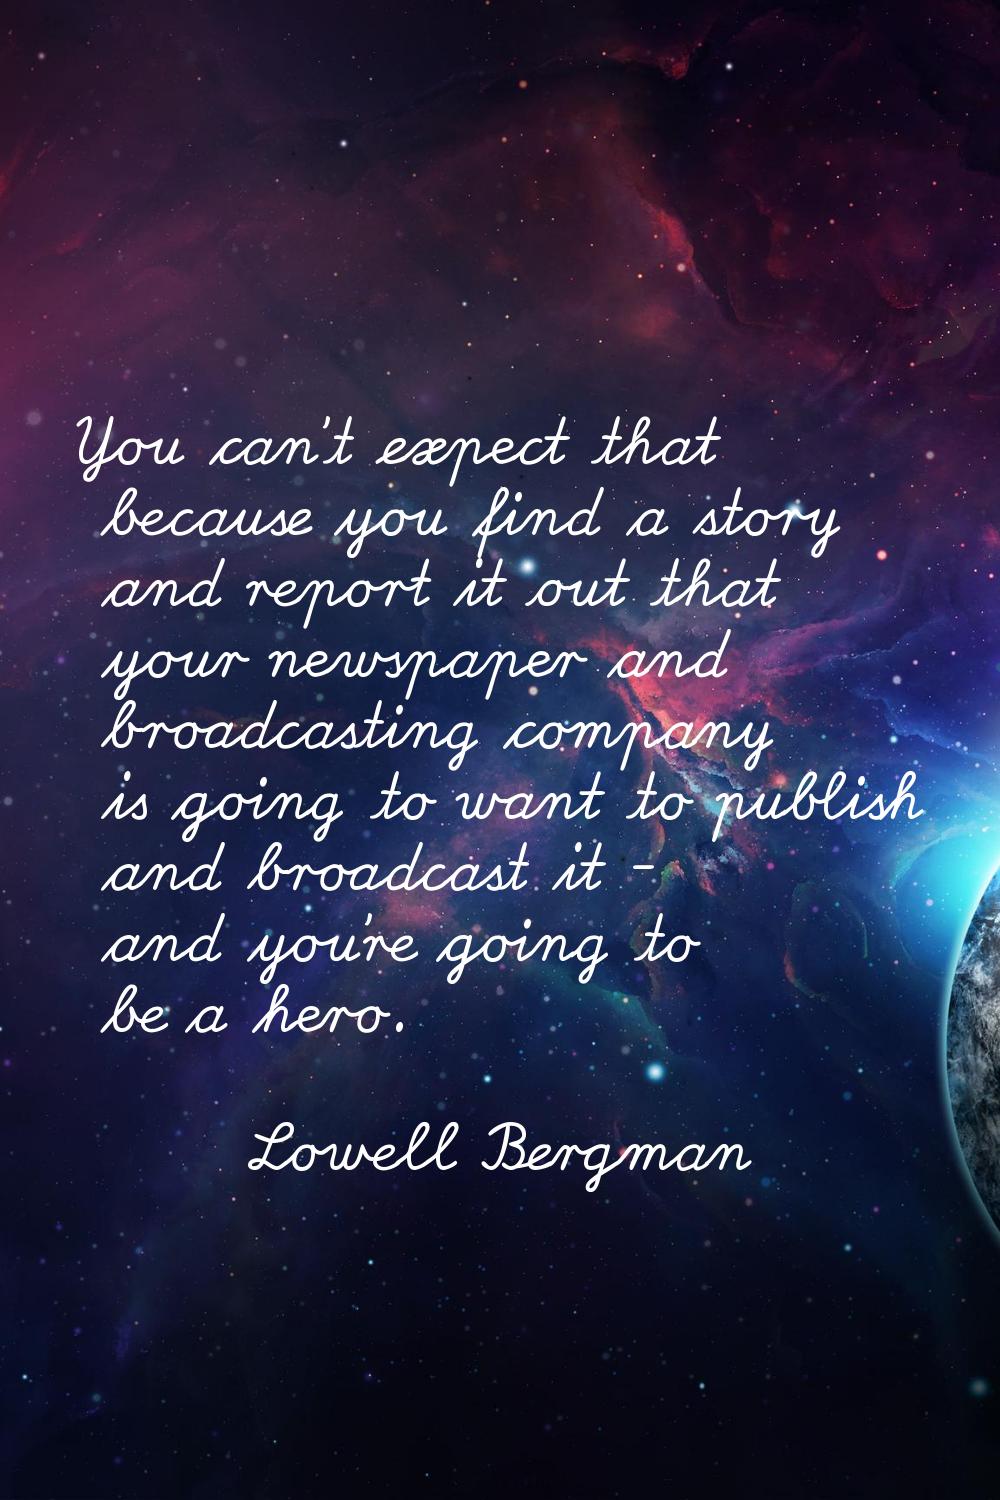 You can't expect that because you find a story and report it out that your newspaper and broadcasti